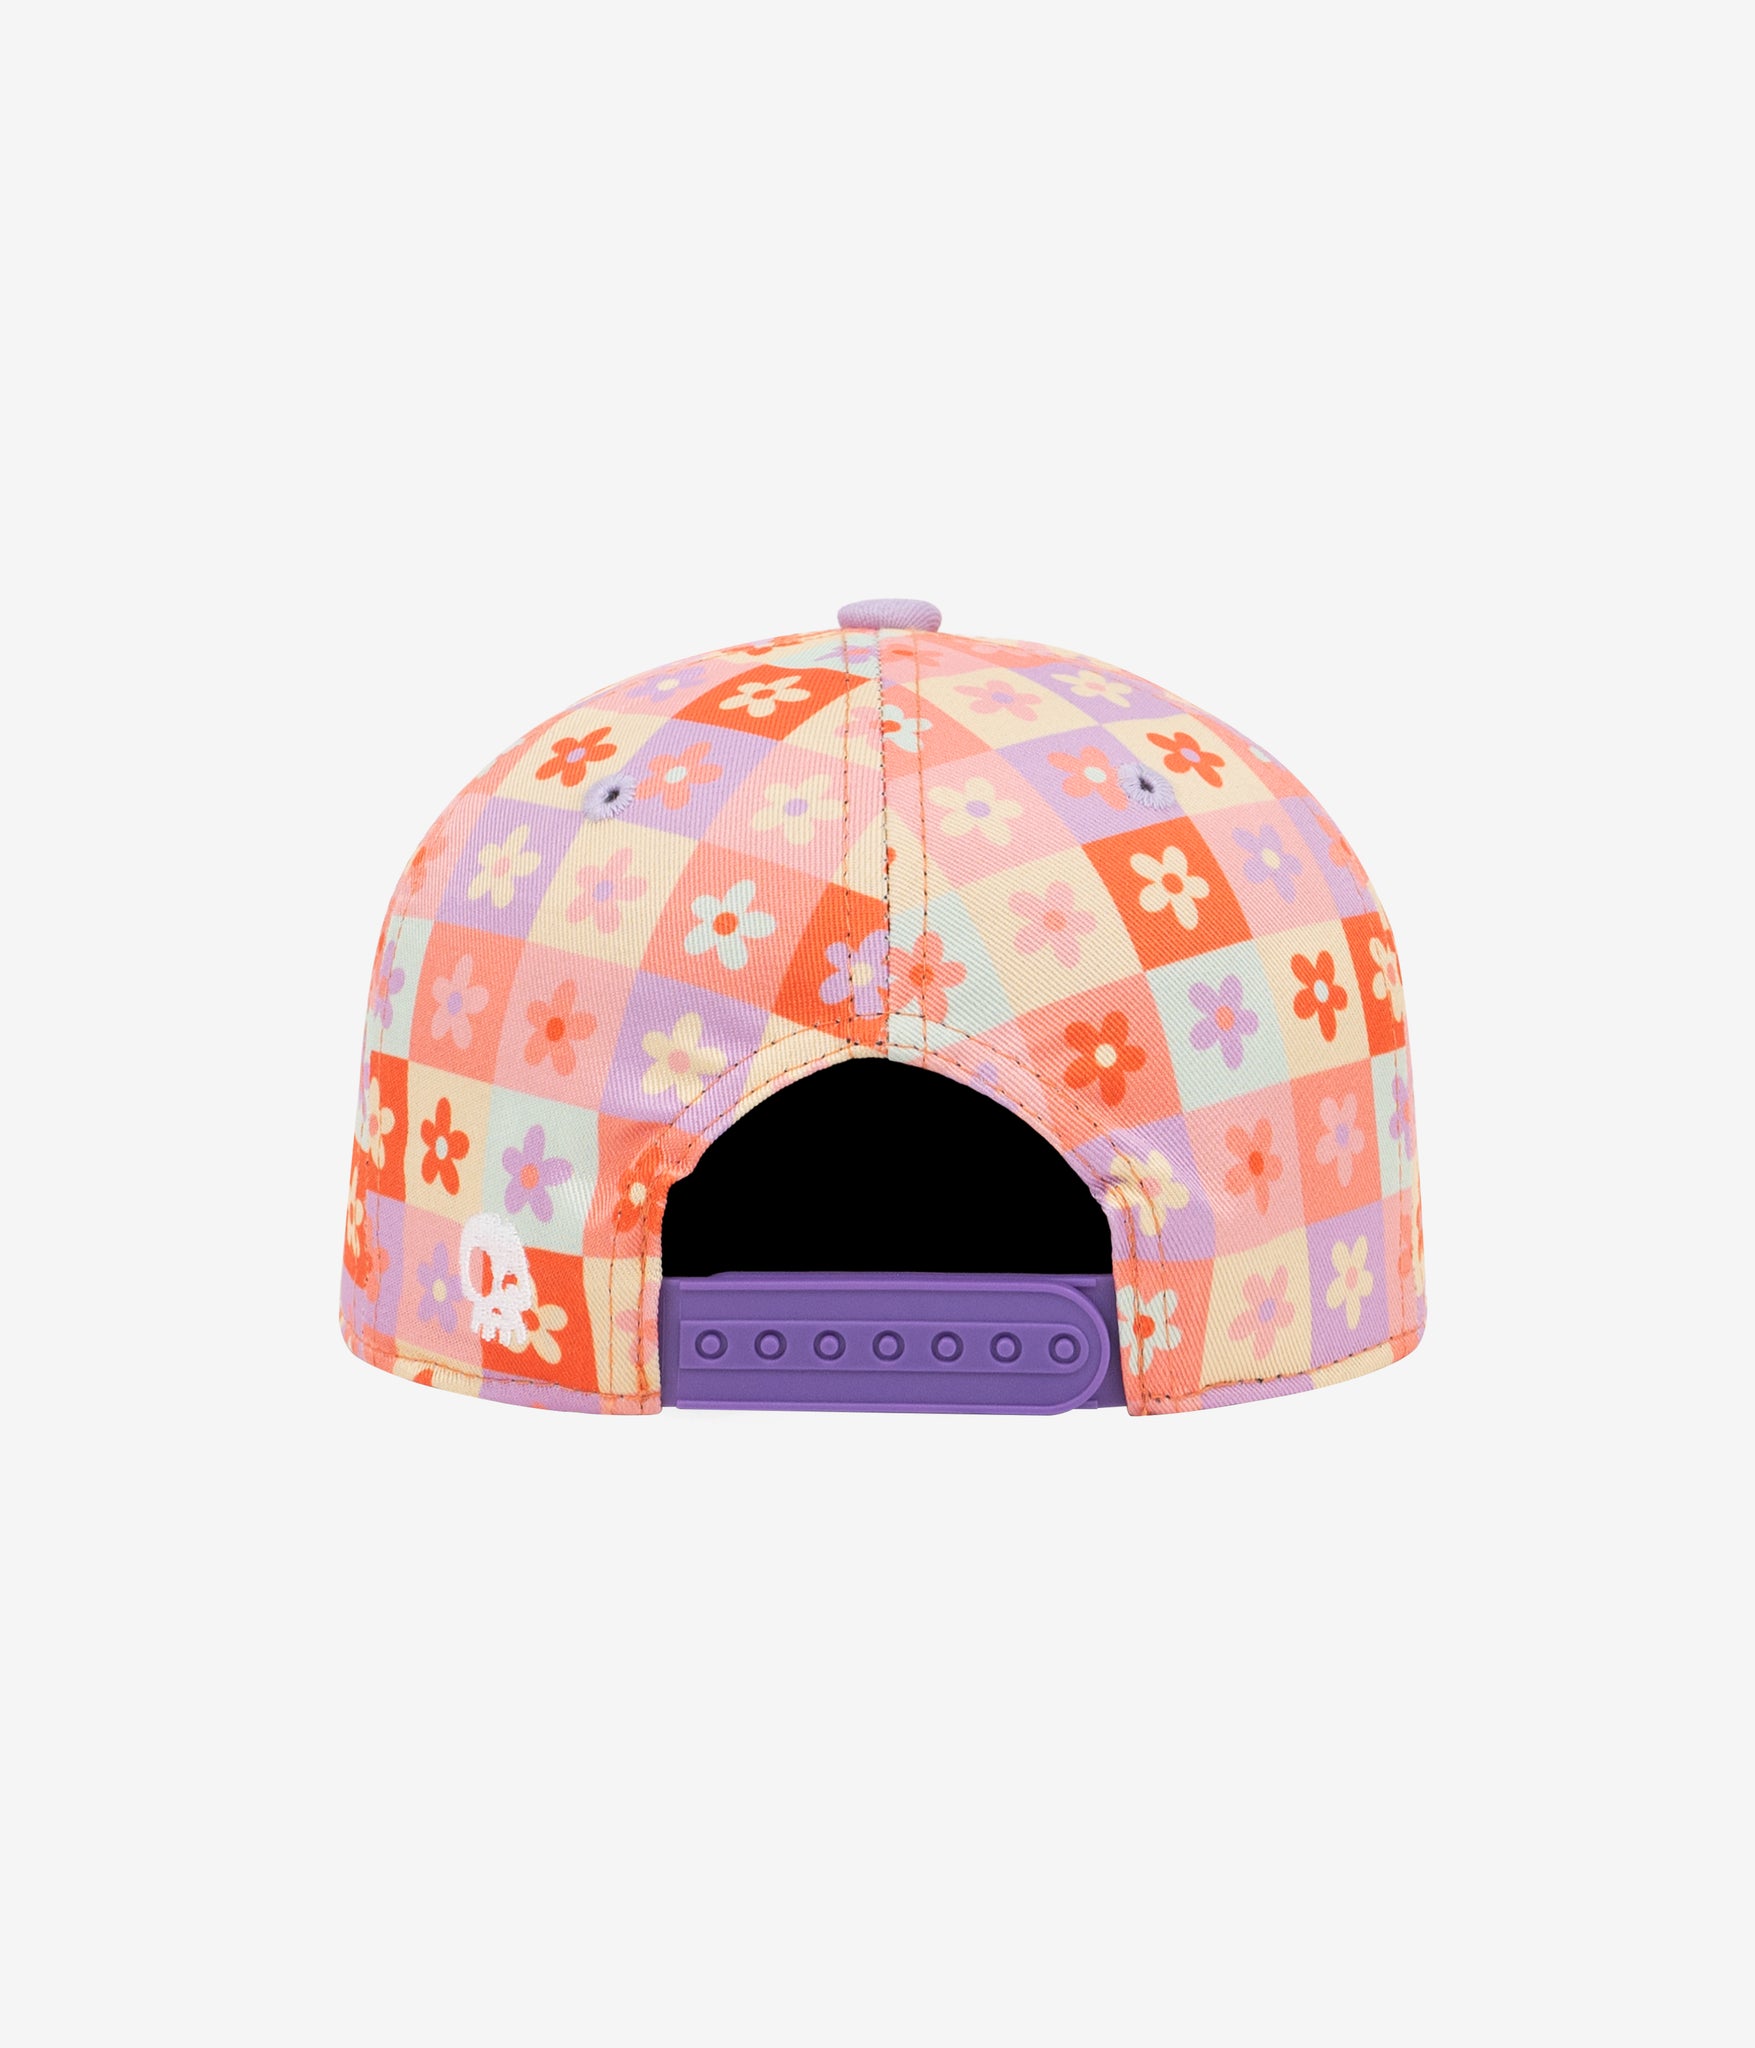 Quilty Flower Snapback Squash